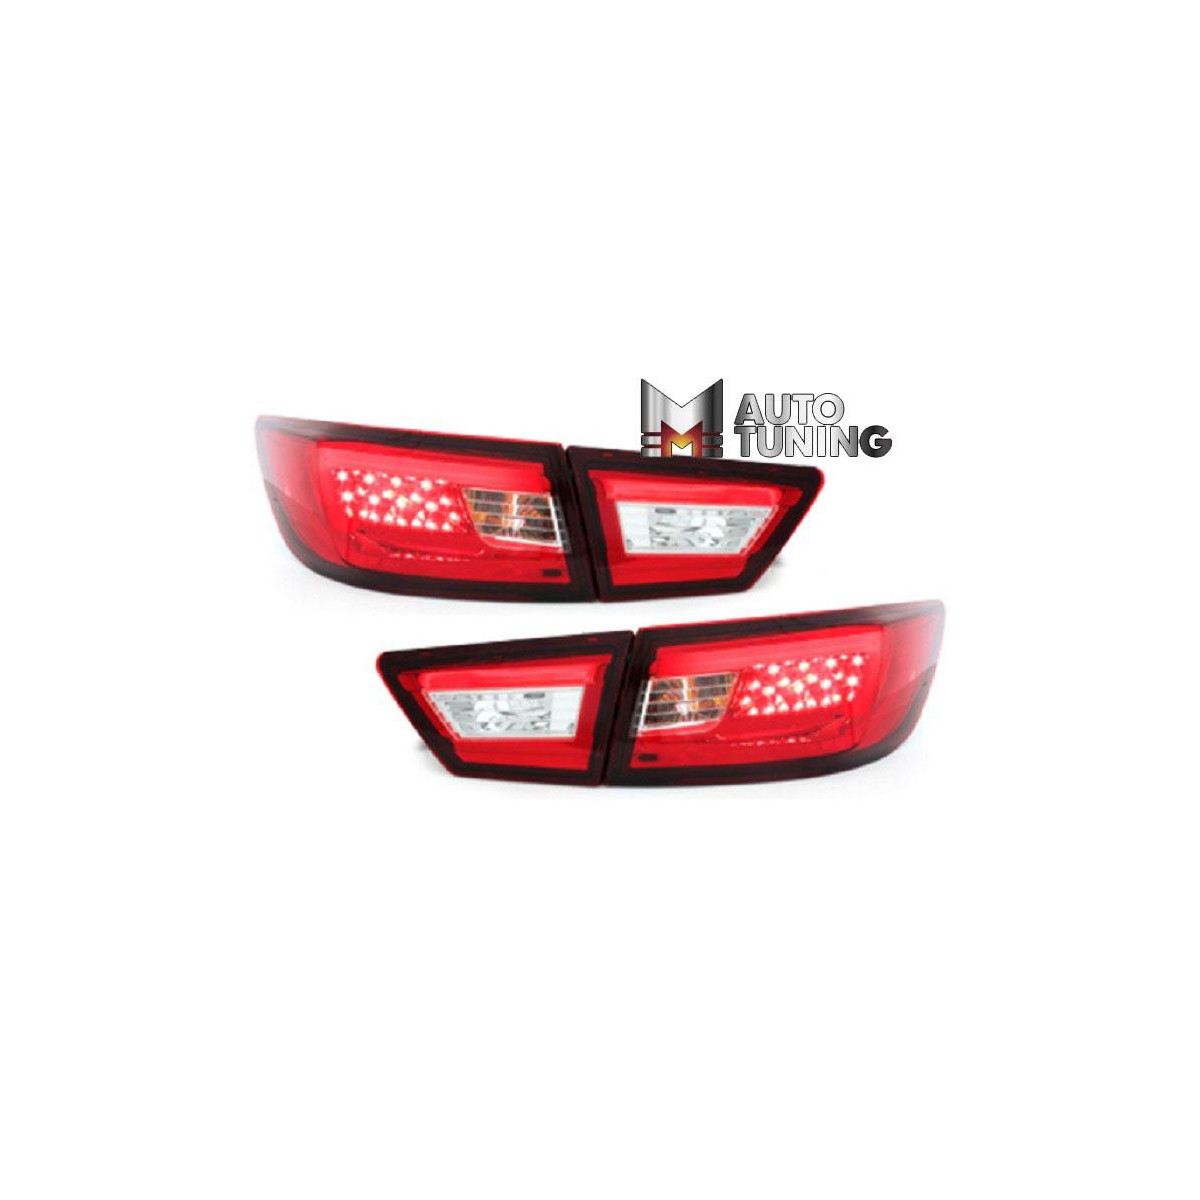 LAMPY LED RENAULT CLIO IV 2013- RED/WHITE